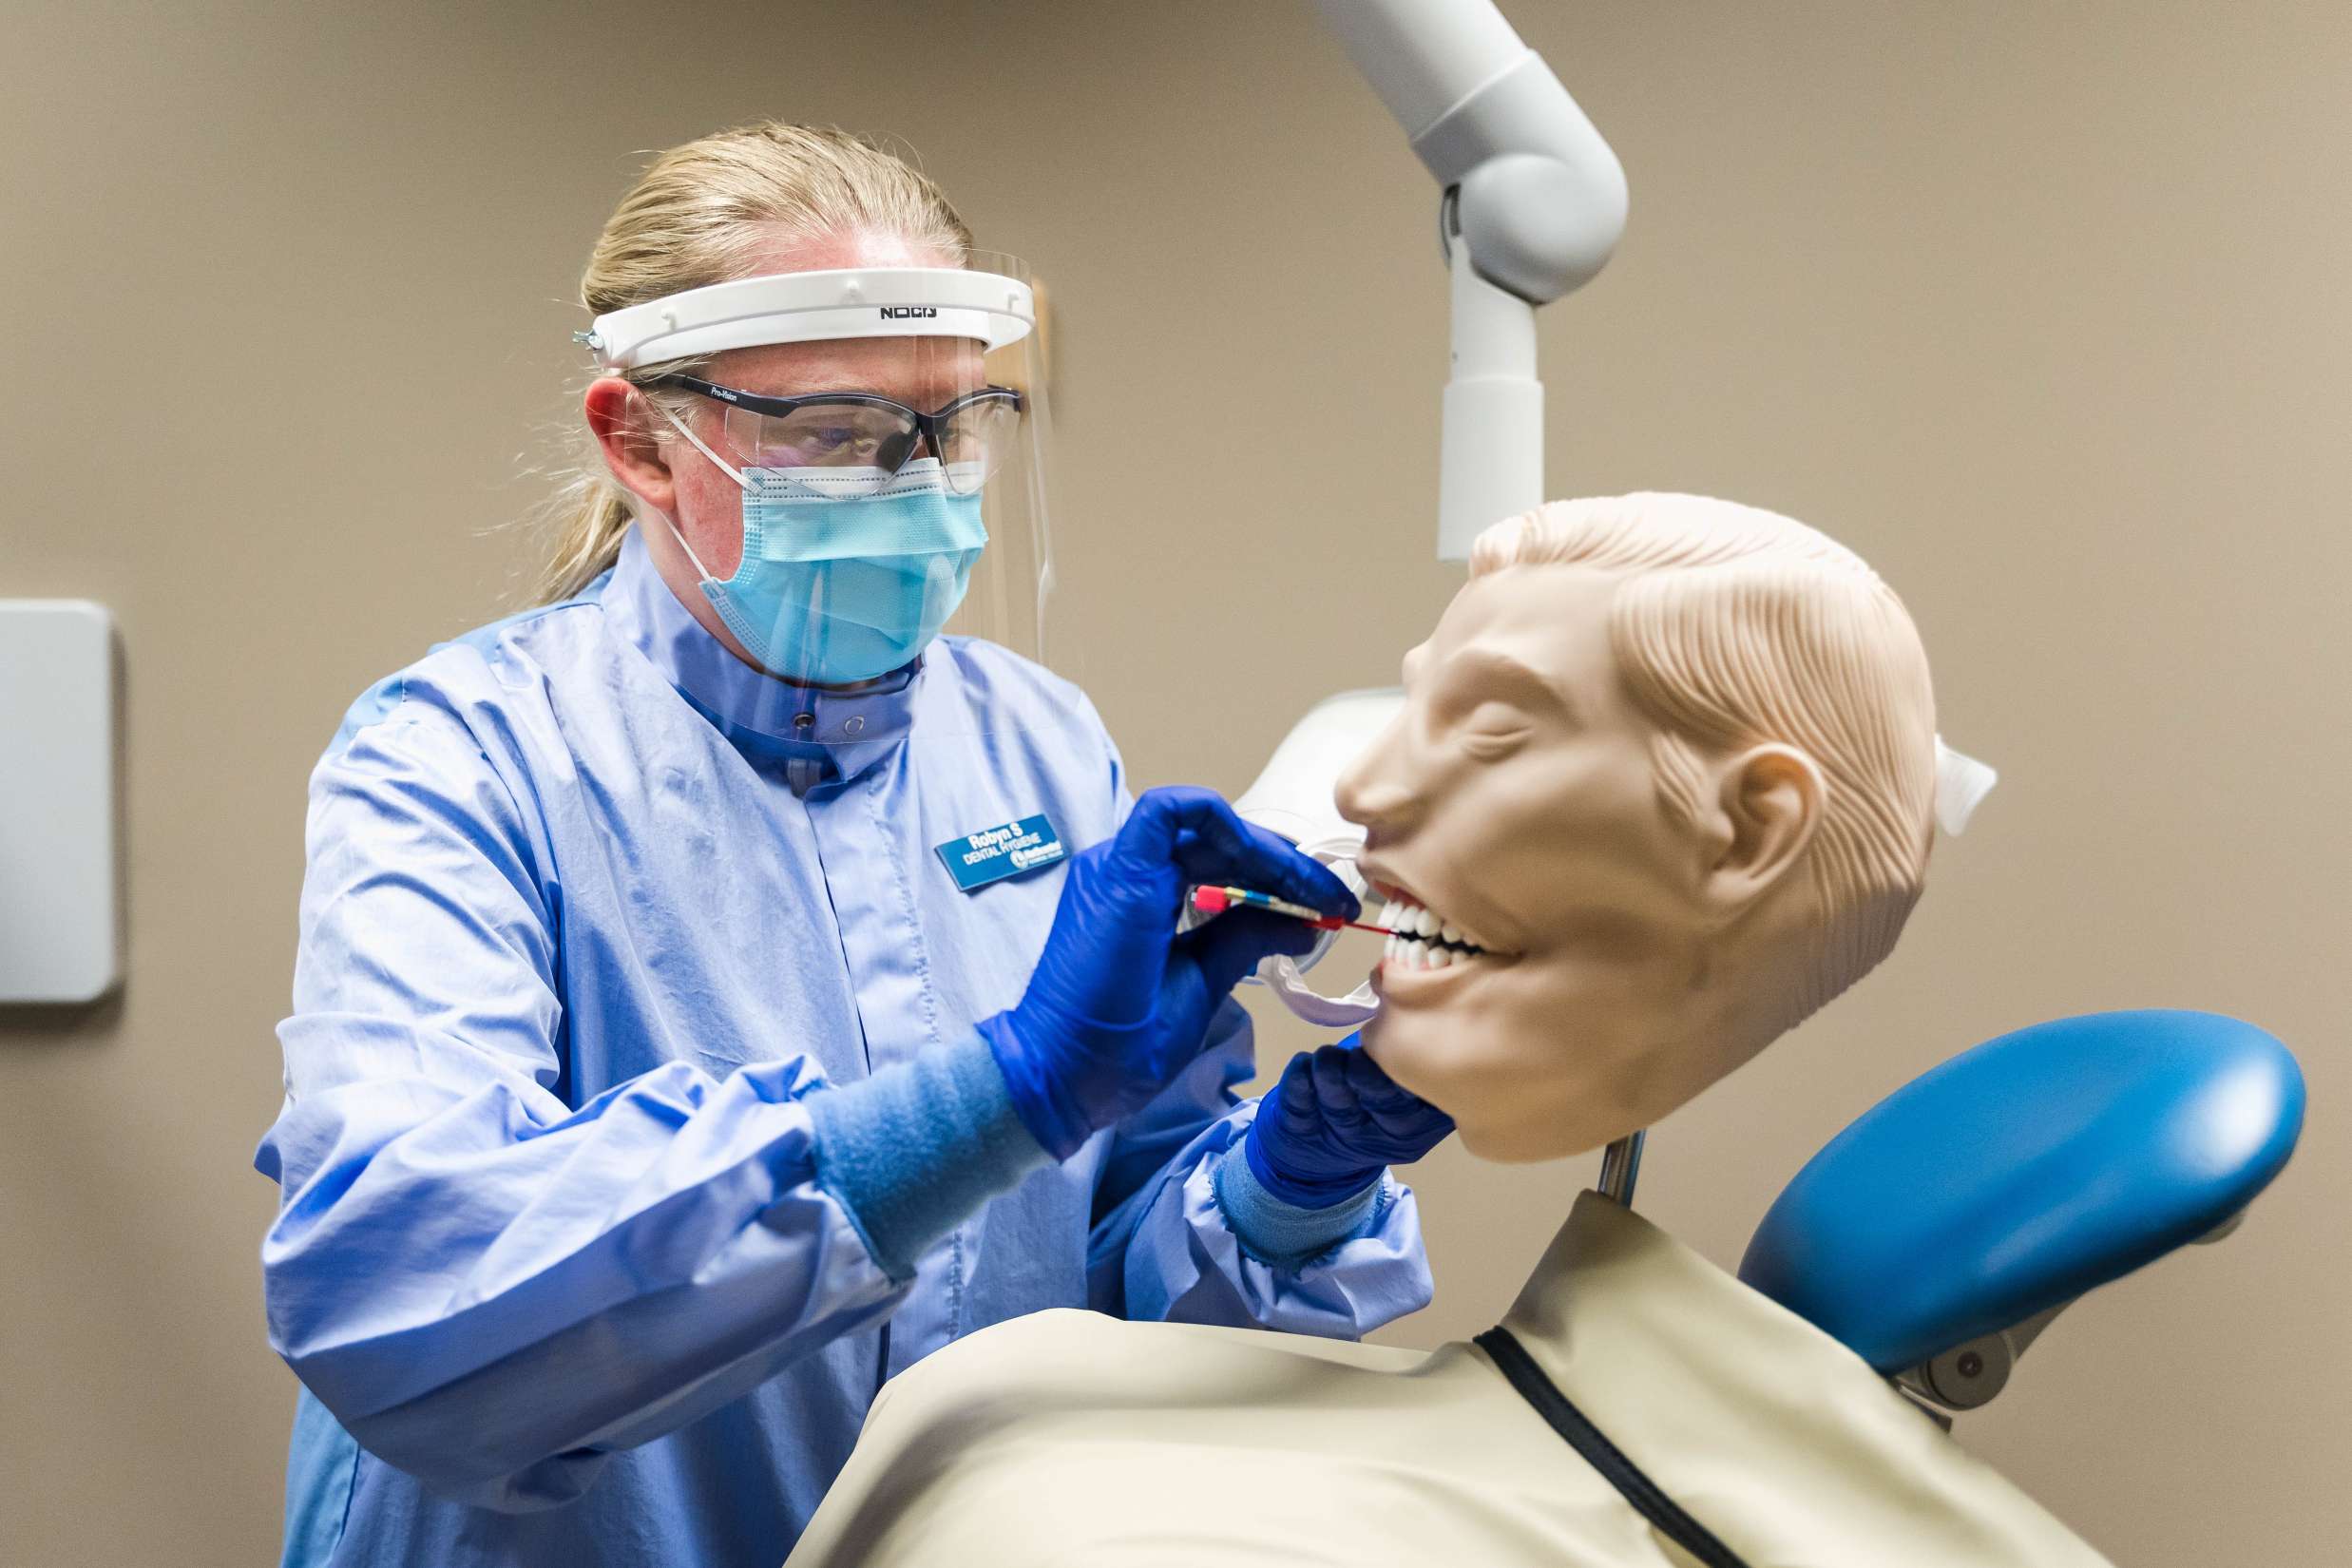 A dental hygienist performs oral cleaning procedures on a mannequin head positioned upright in a procedure room chair.